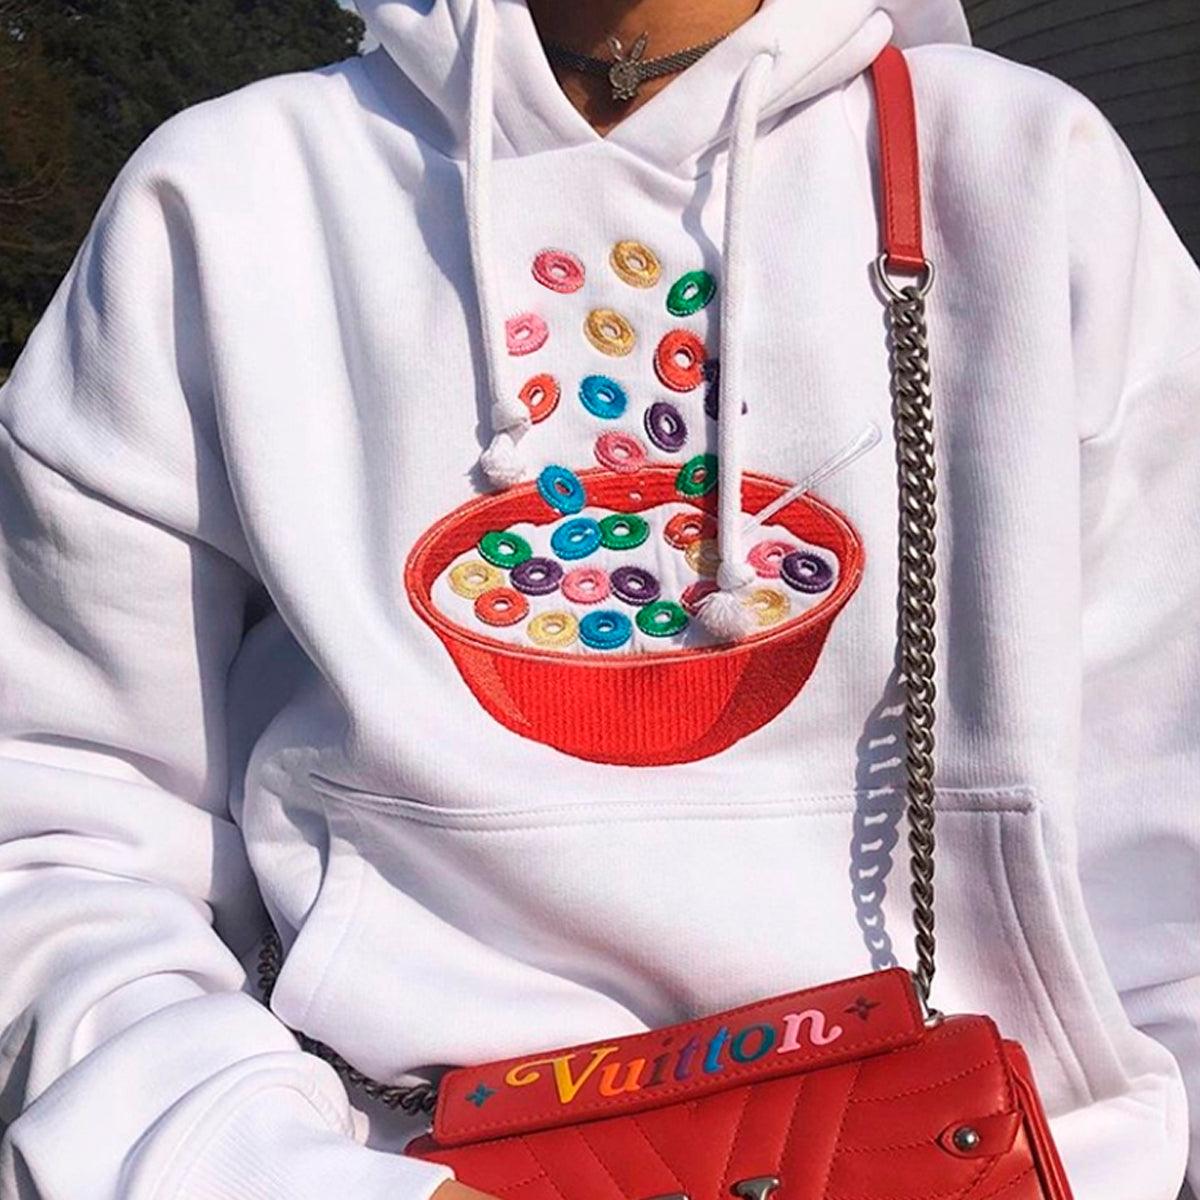 Colored Cereal Embroidery Hoodie - Aesthetic Clothes Shop